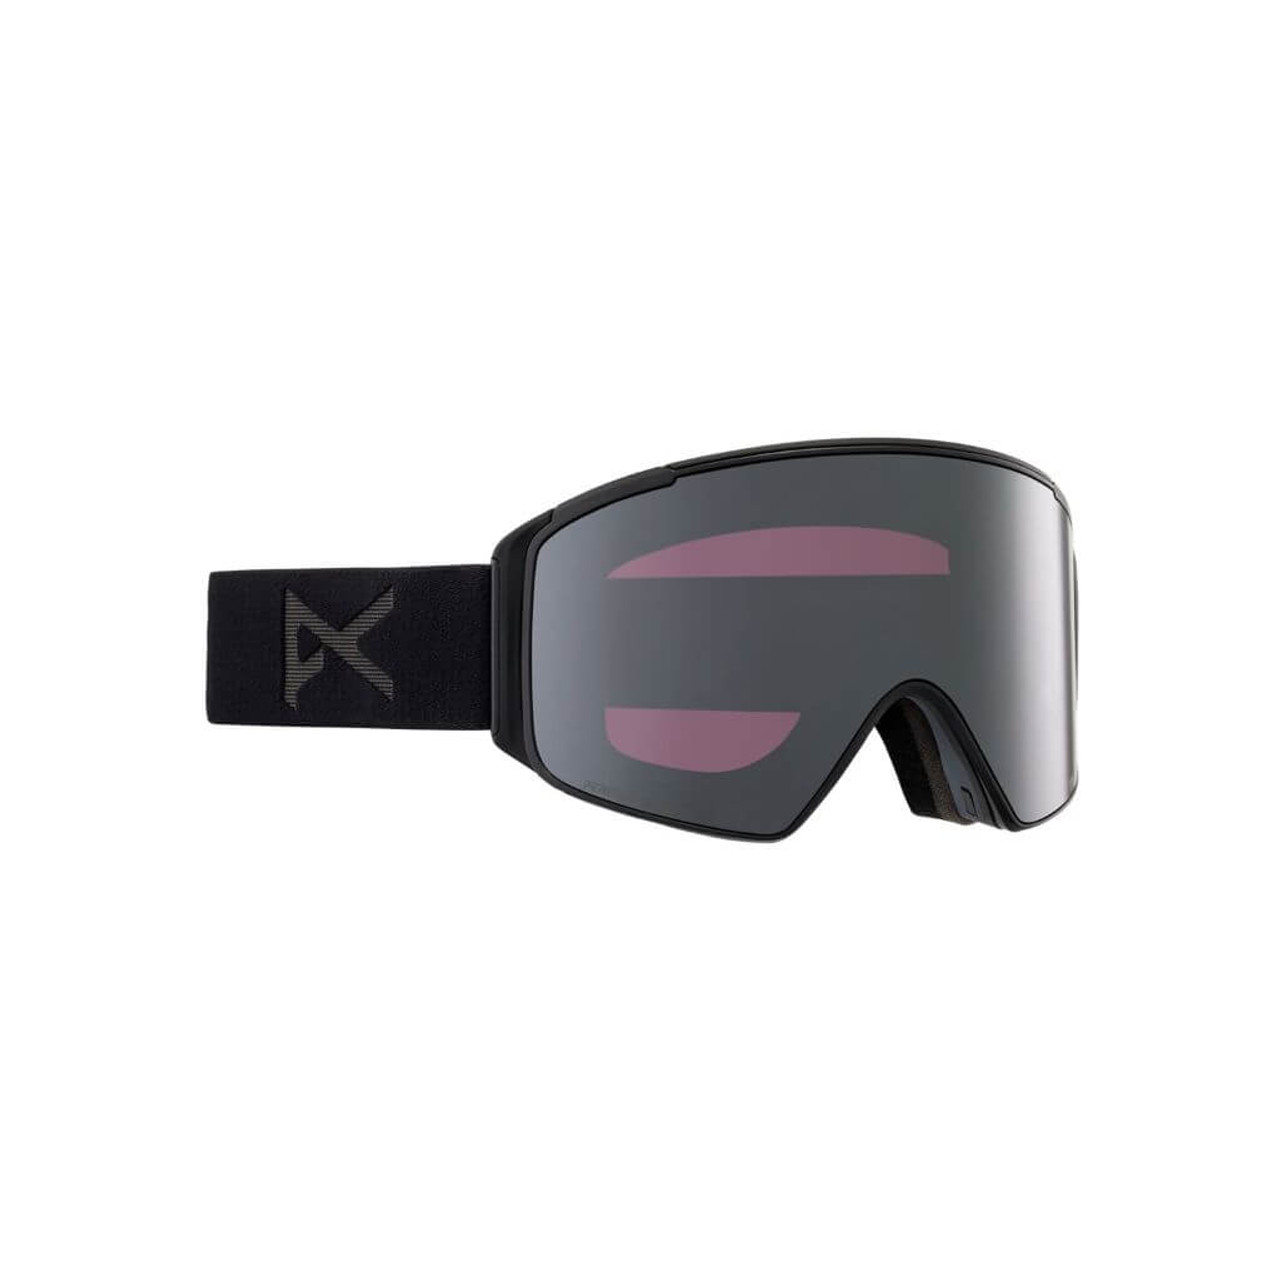 Smoke w/Perceive Sunny Onyx - Anon M4S Cylindrical goggle